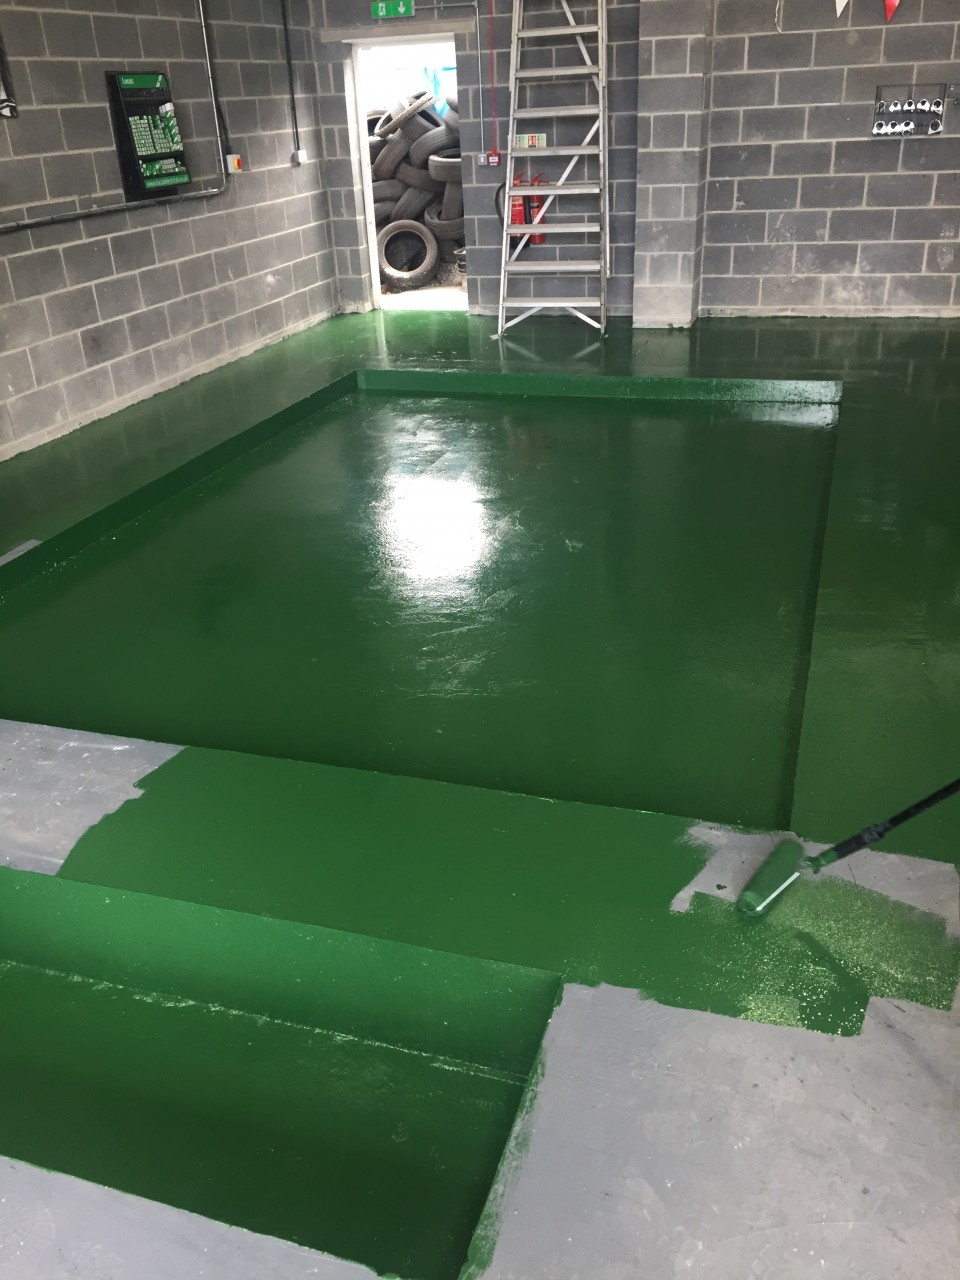 AESTHETICS ARE IMPORTANT TOO - THE FUSION AUTOS GREEN PAINT BEING PAINTED TO THE FLOOR.